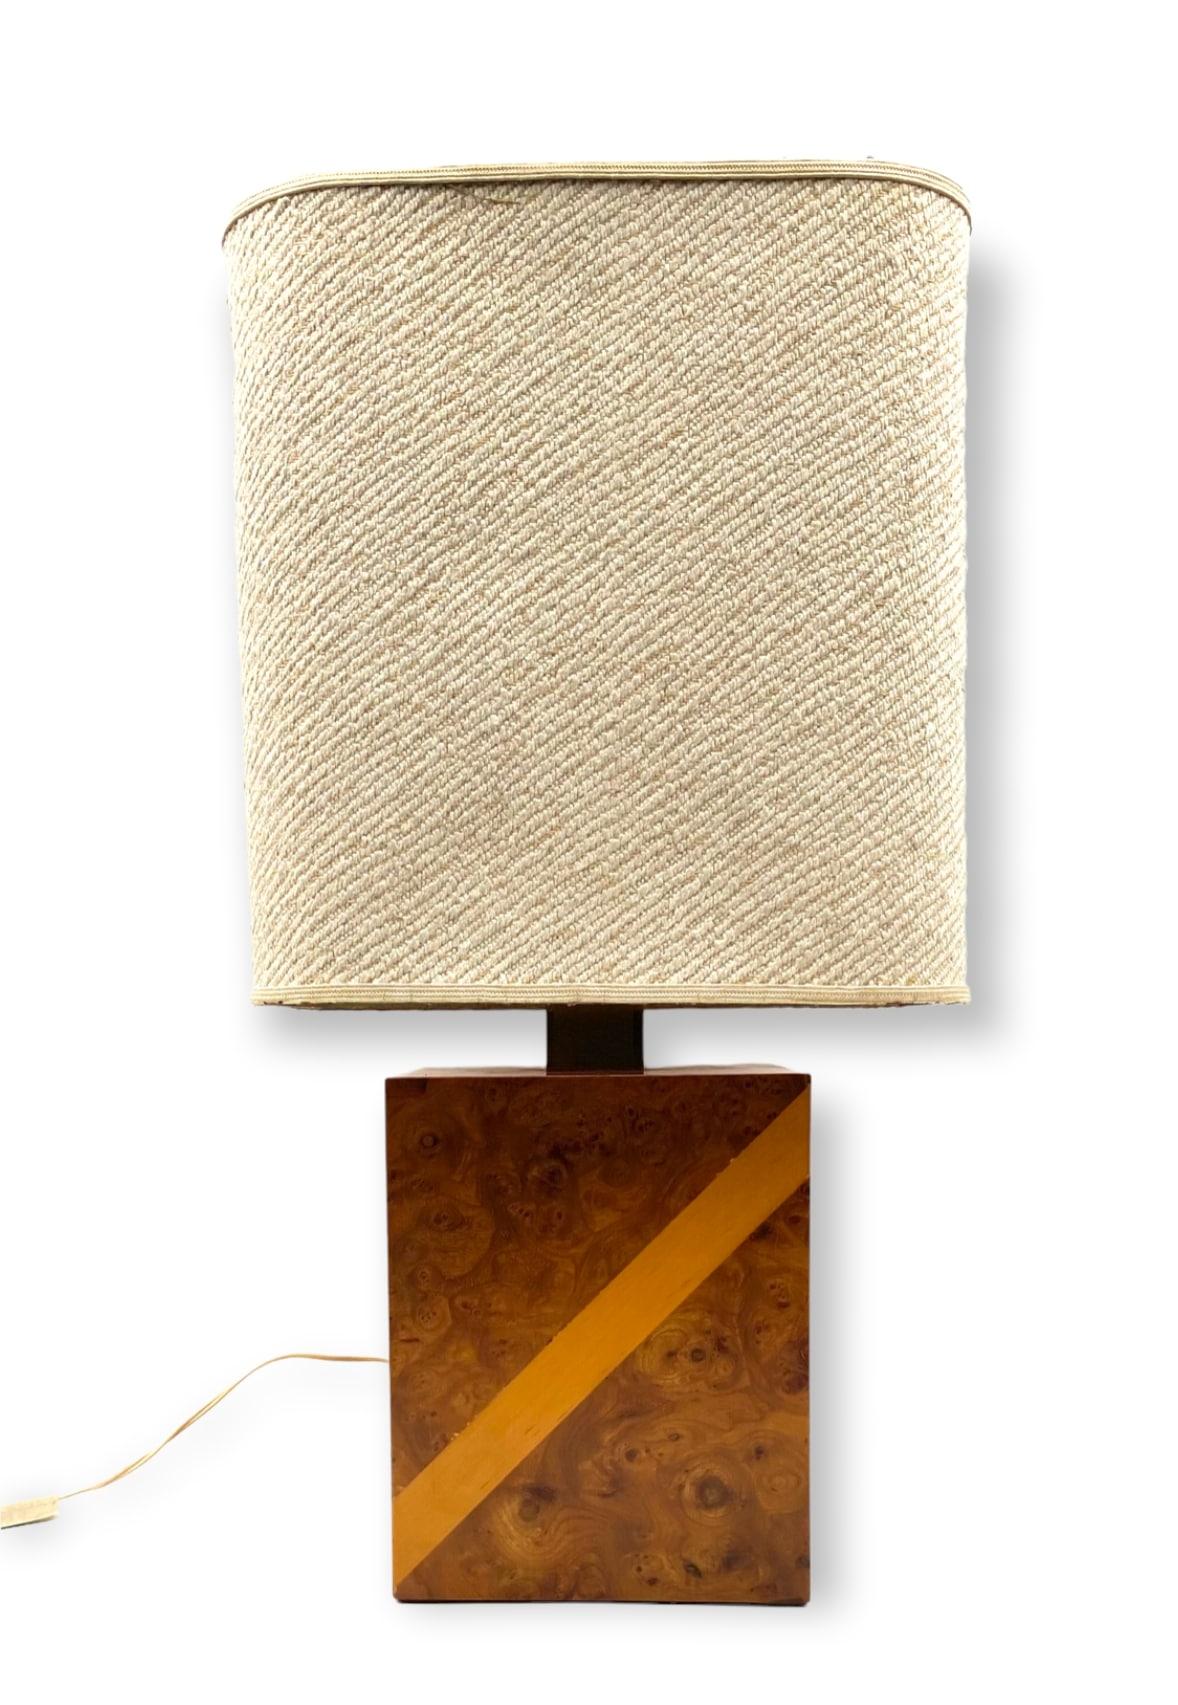 Hollywood Regency Cubic Wood and Brass Table Lamp, Italy, 1970s For Sale 3